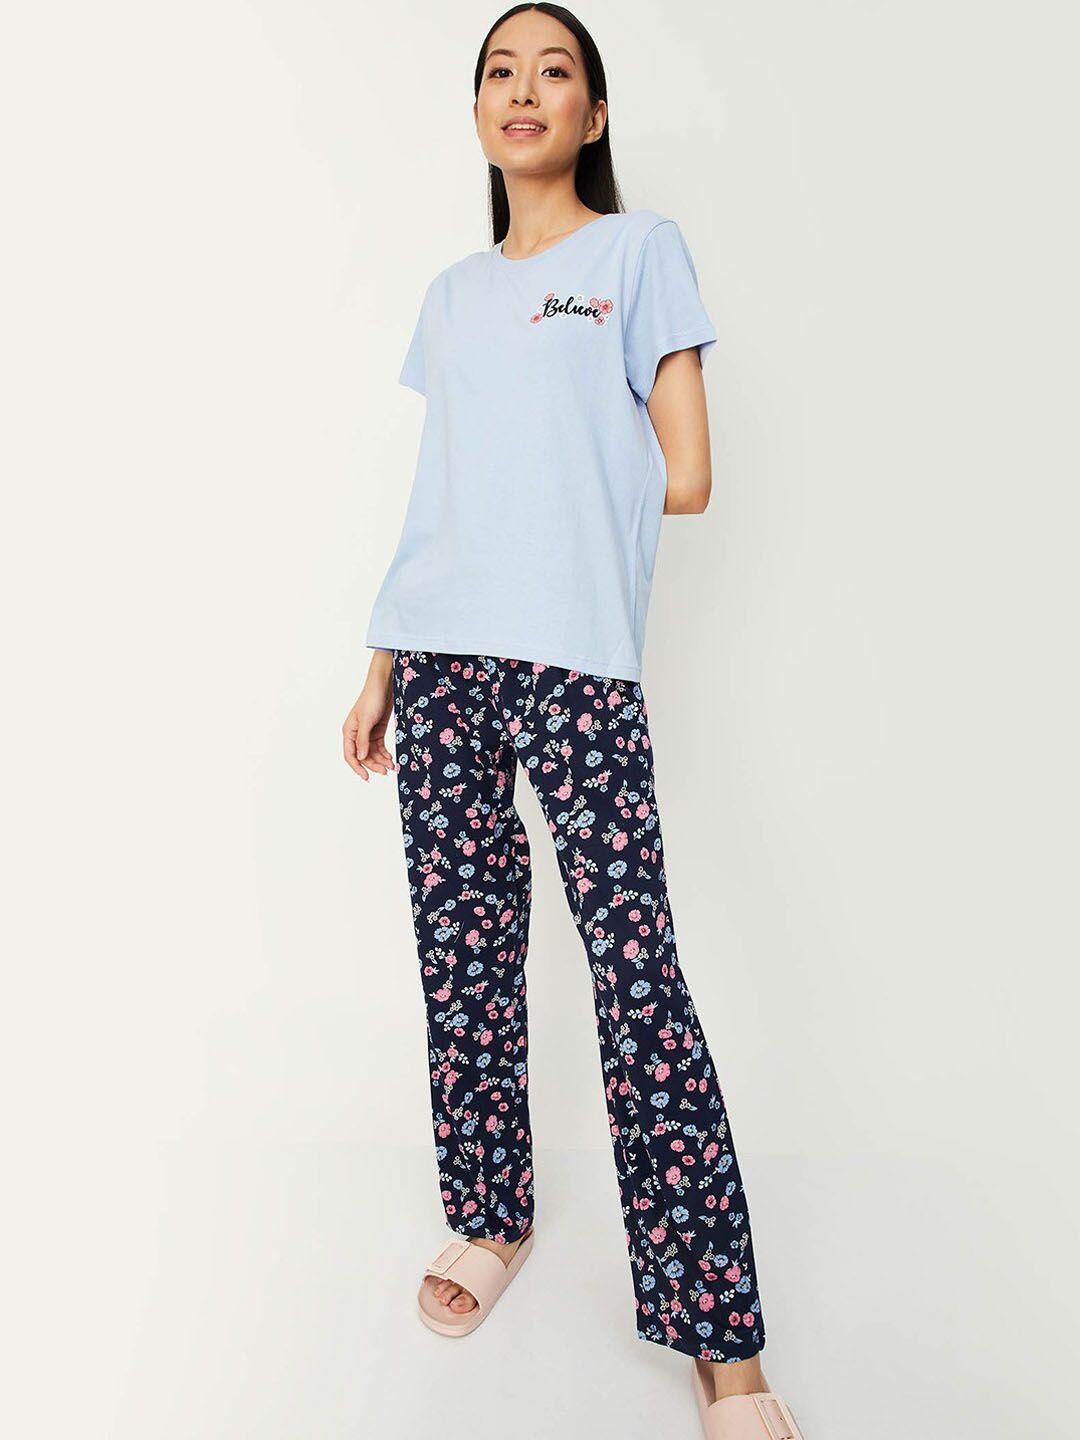 max printed pure cotton night suit